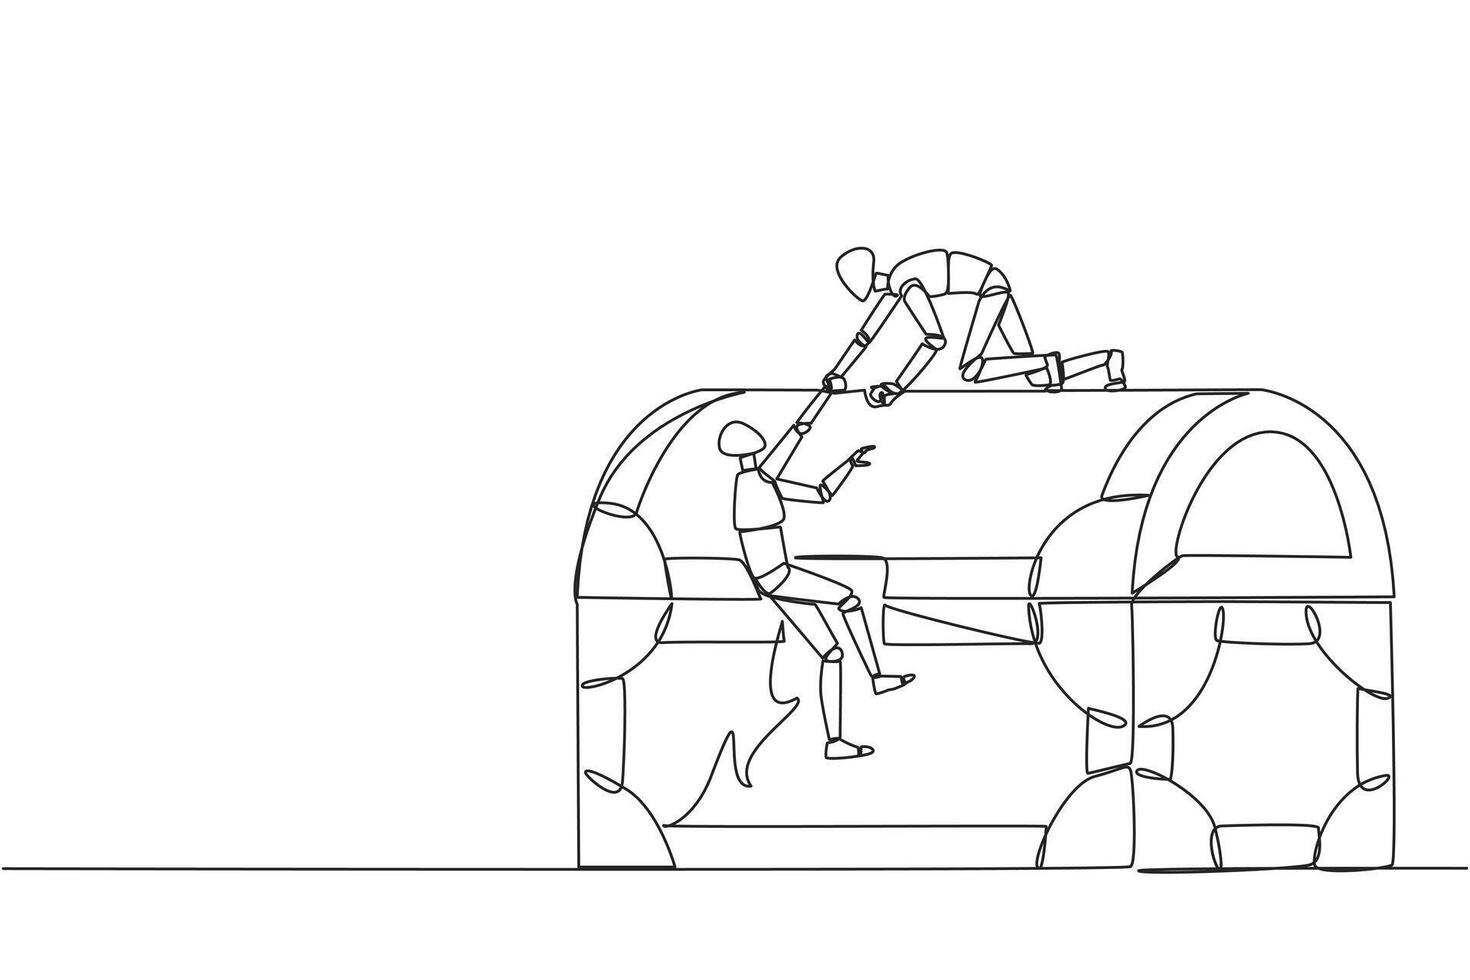 Single continuous line drawing smart robot helps colleague climbing the big treasure chest. Get extraordinary profits. Share equally. Stronger together. Reward. One line design illustration vector